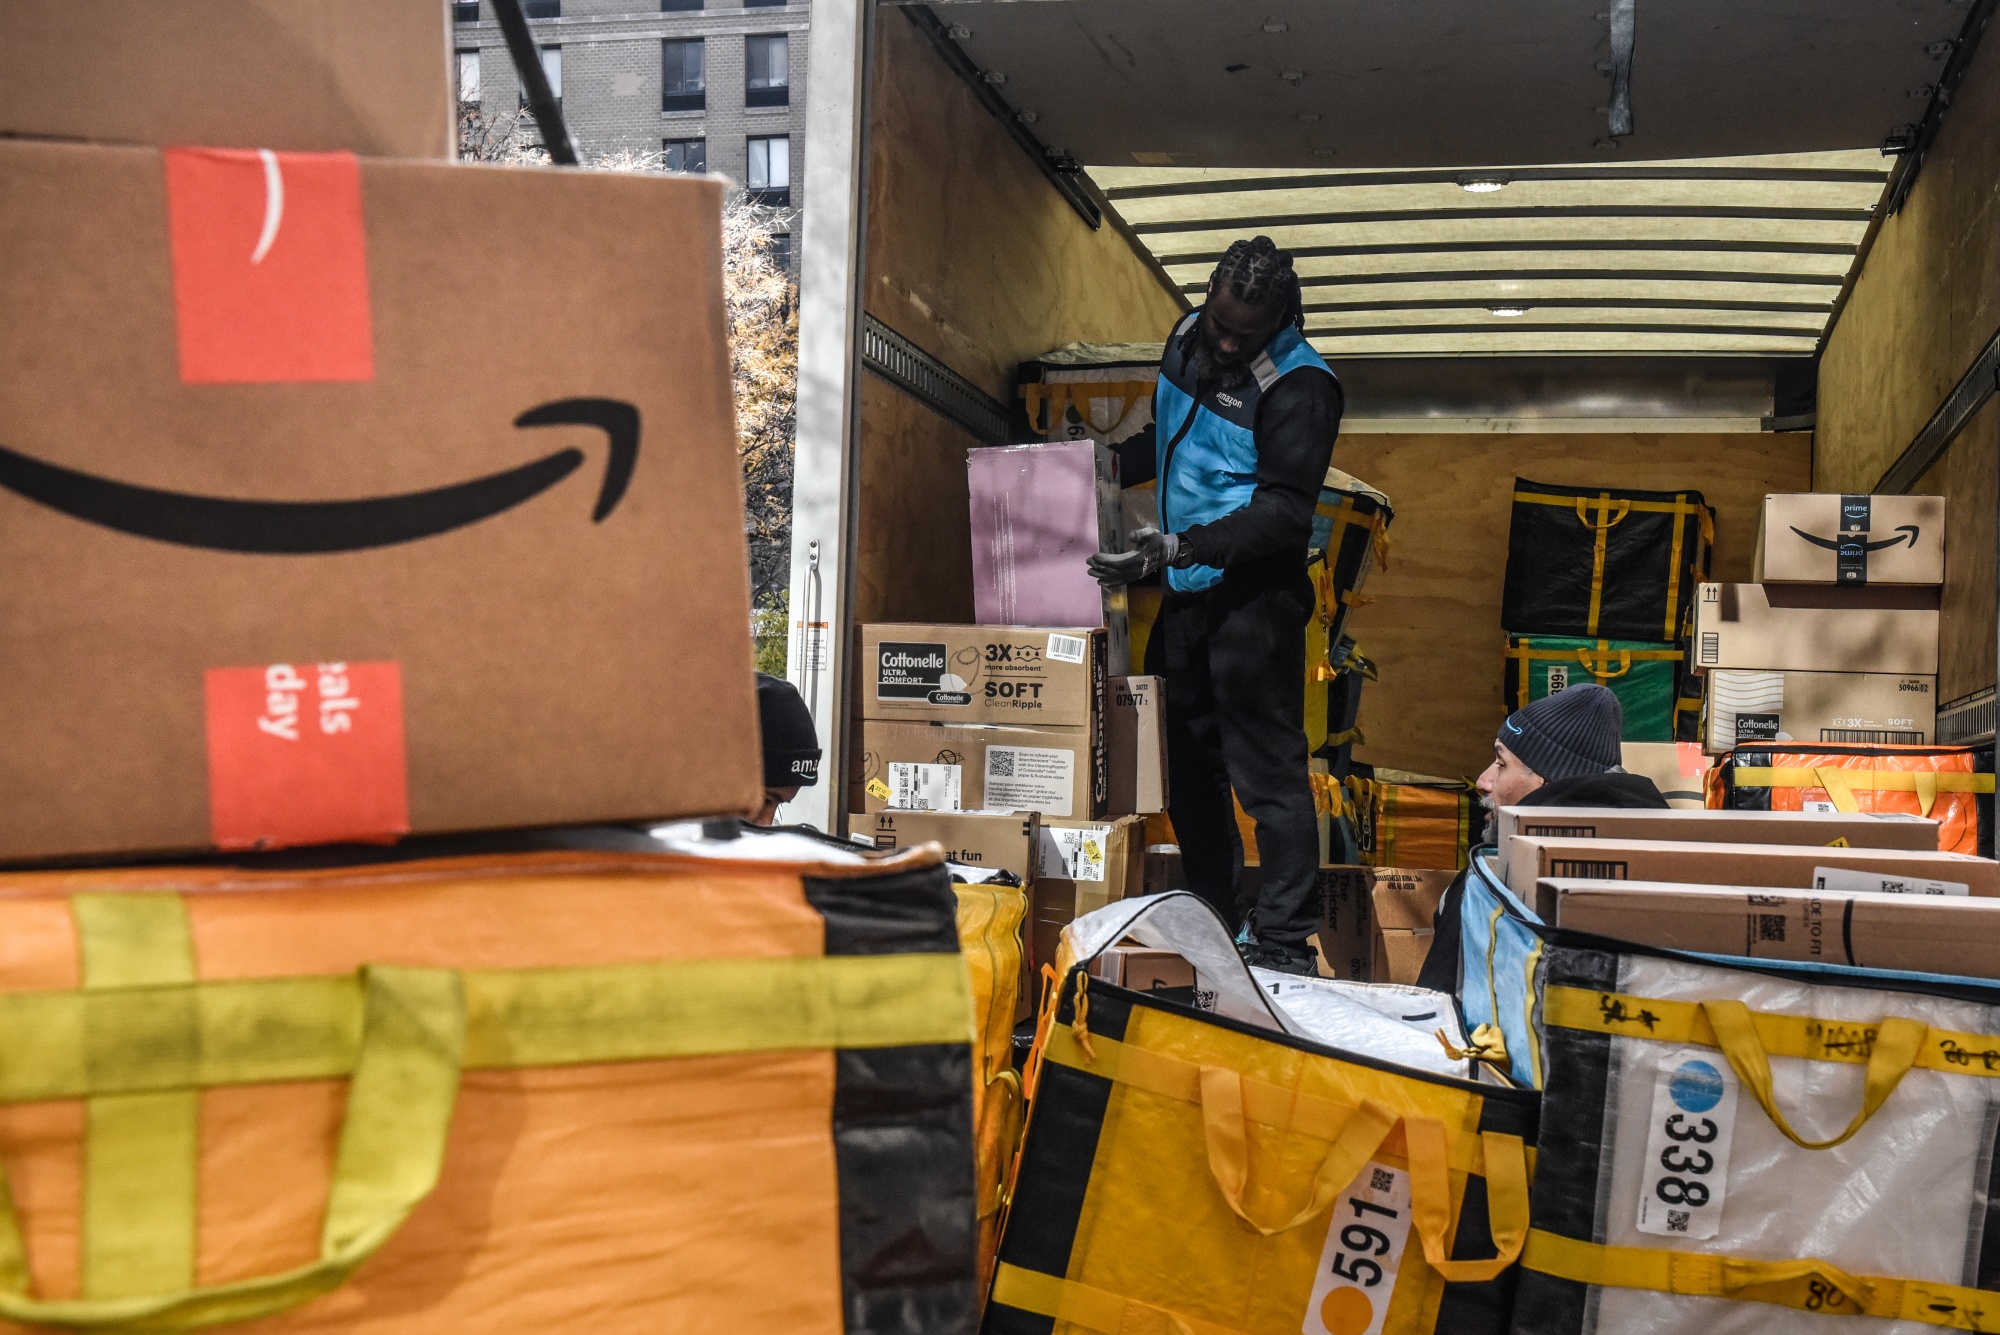 2 weeks ago, during  Prime day sales, people bought more than 25  million items with same-day or next-day delivery, with hundreds of…